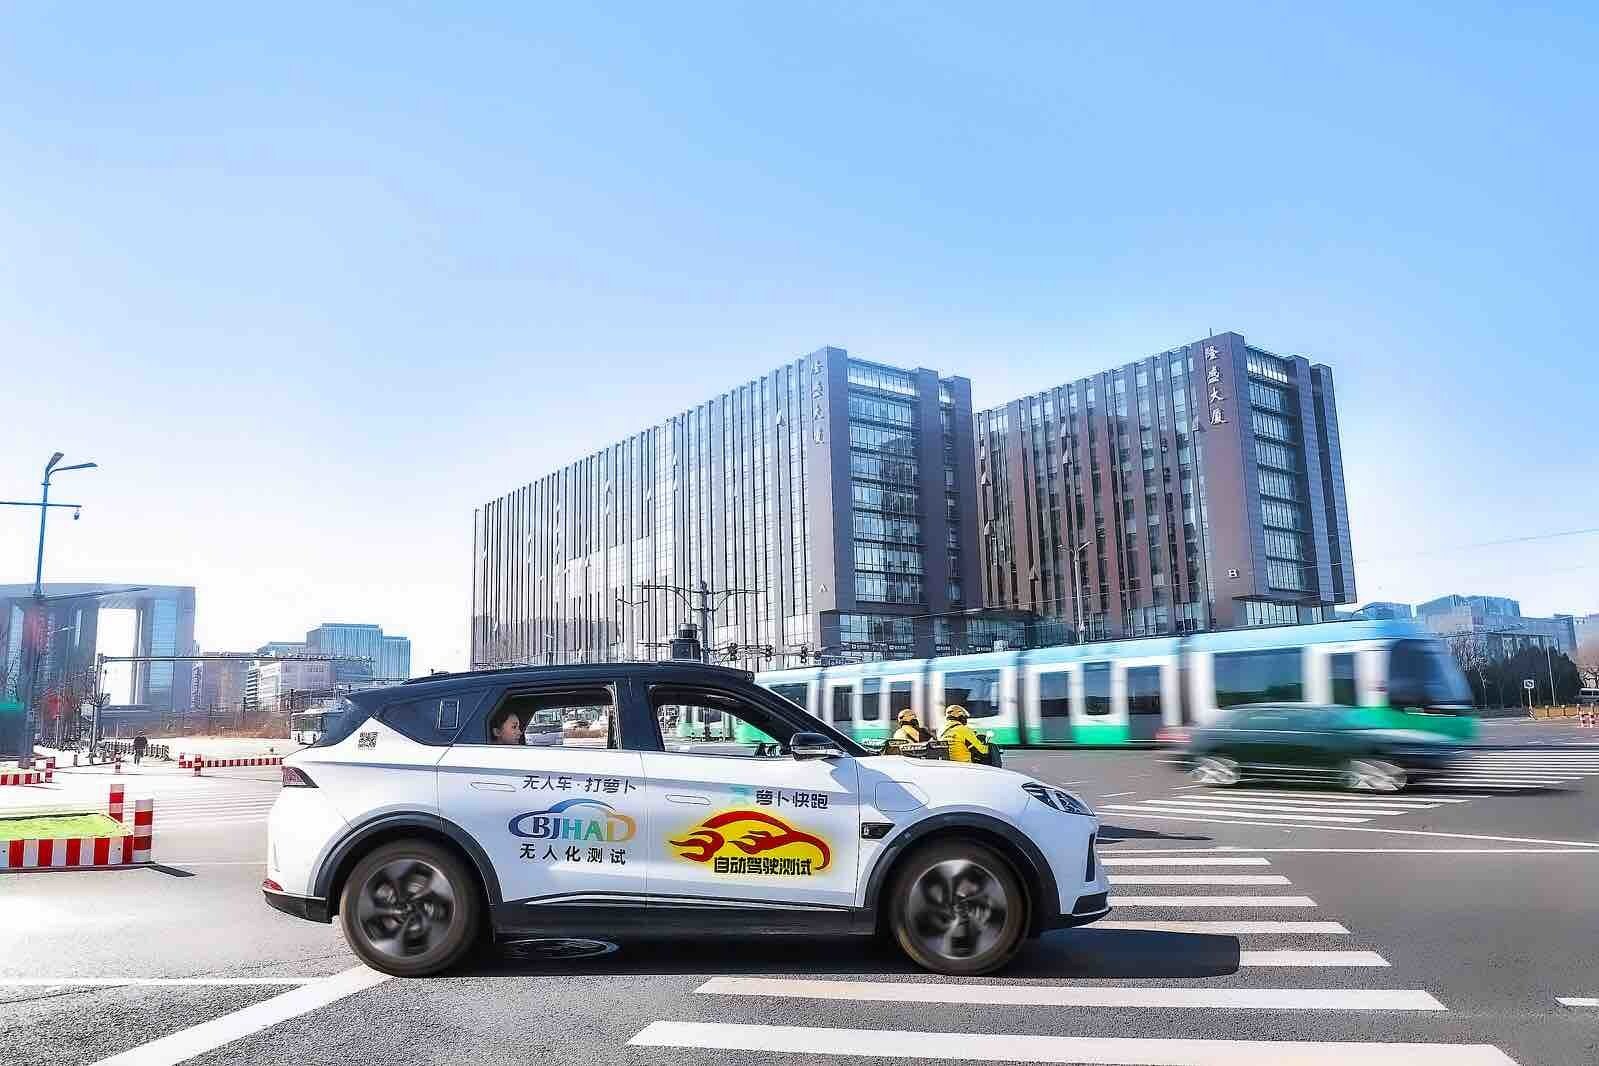 Baidu Wins China Capital City's First-Ever Permit to Provide Fully Driverless Ride-hailing Service